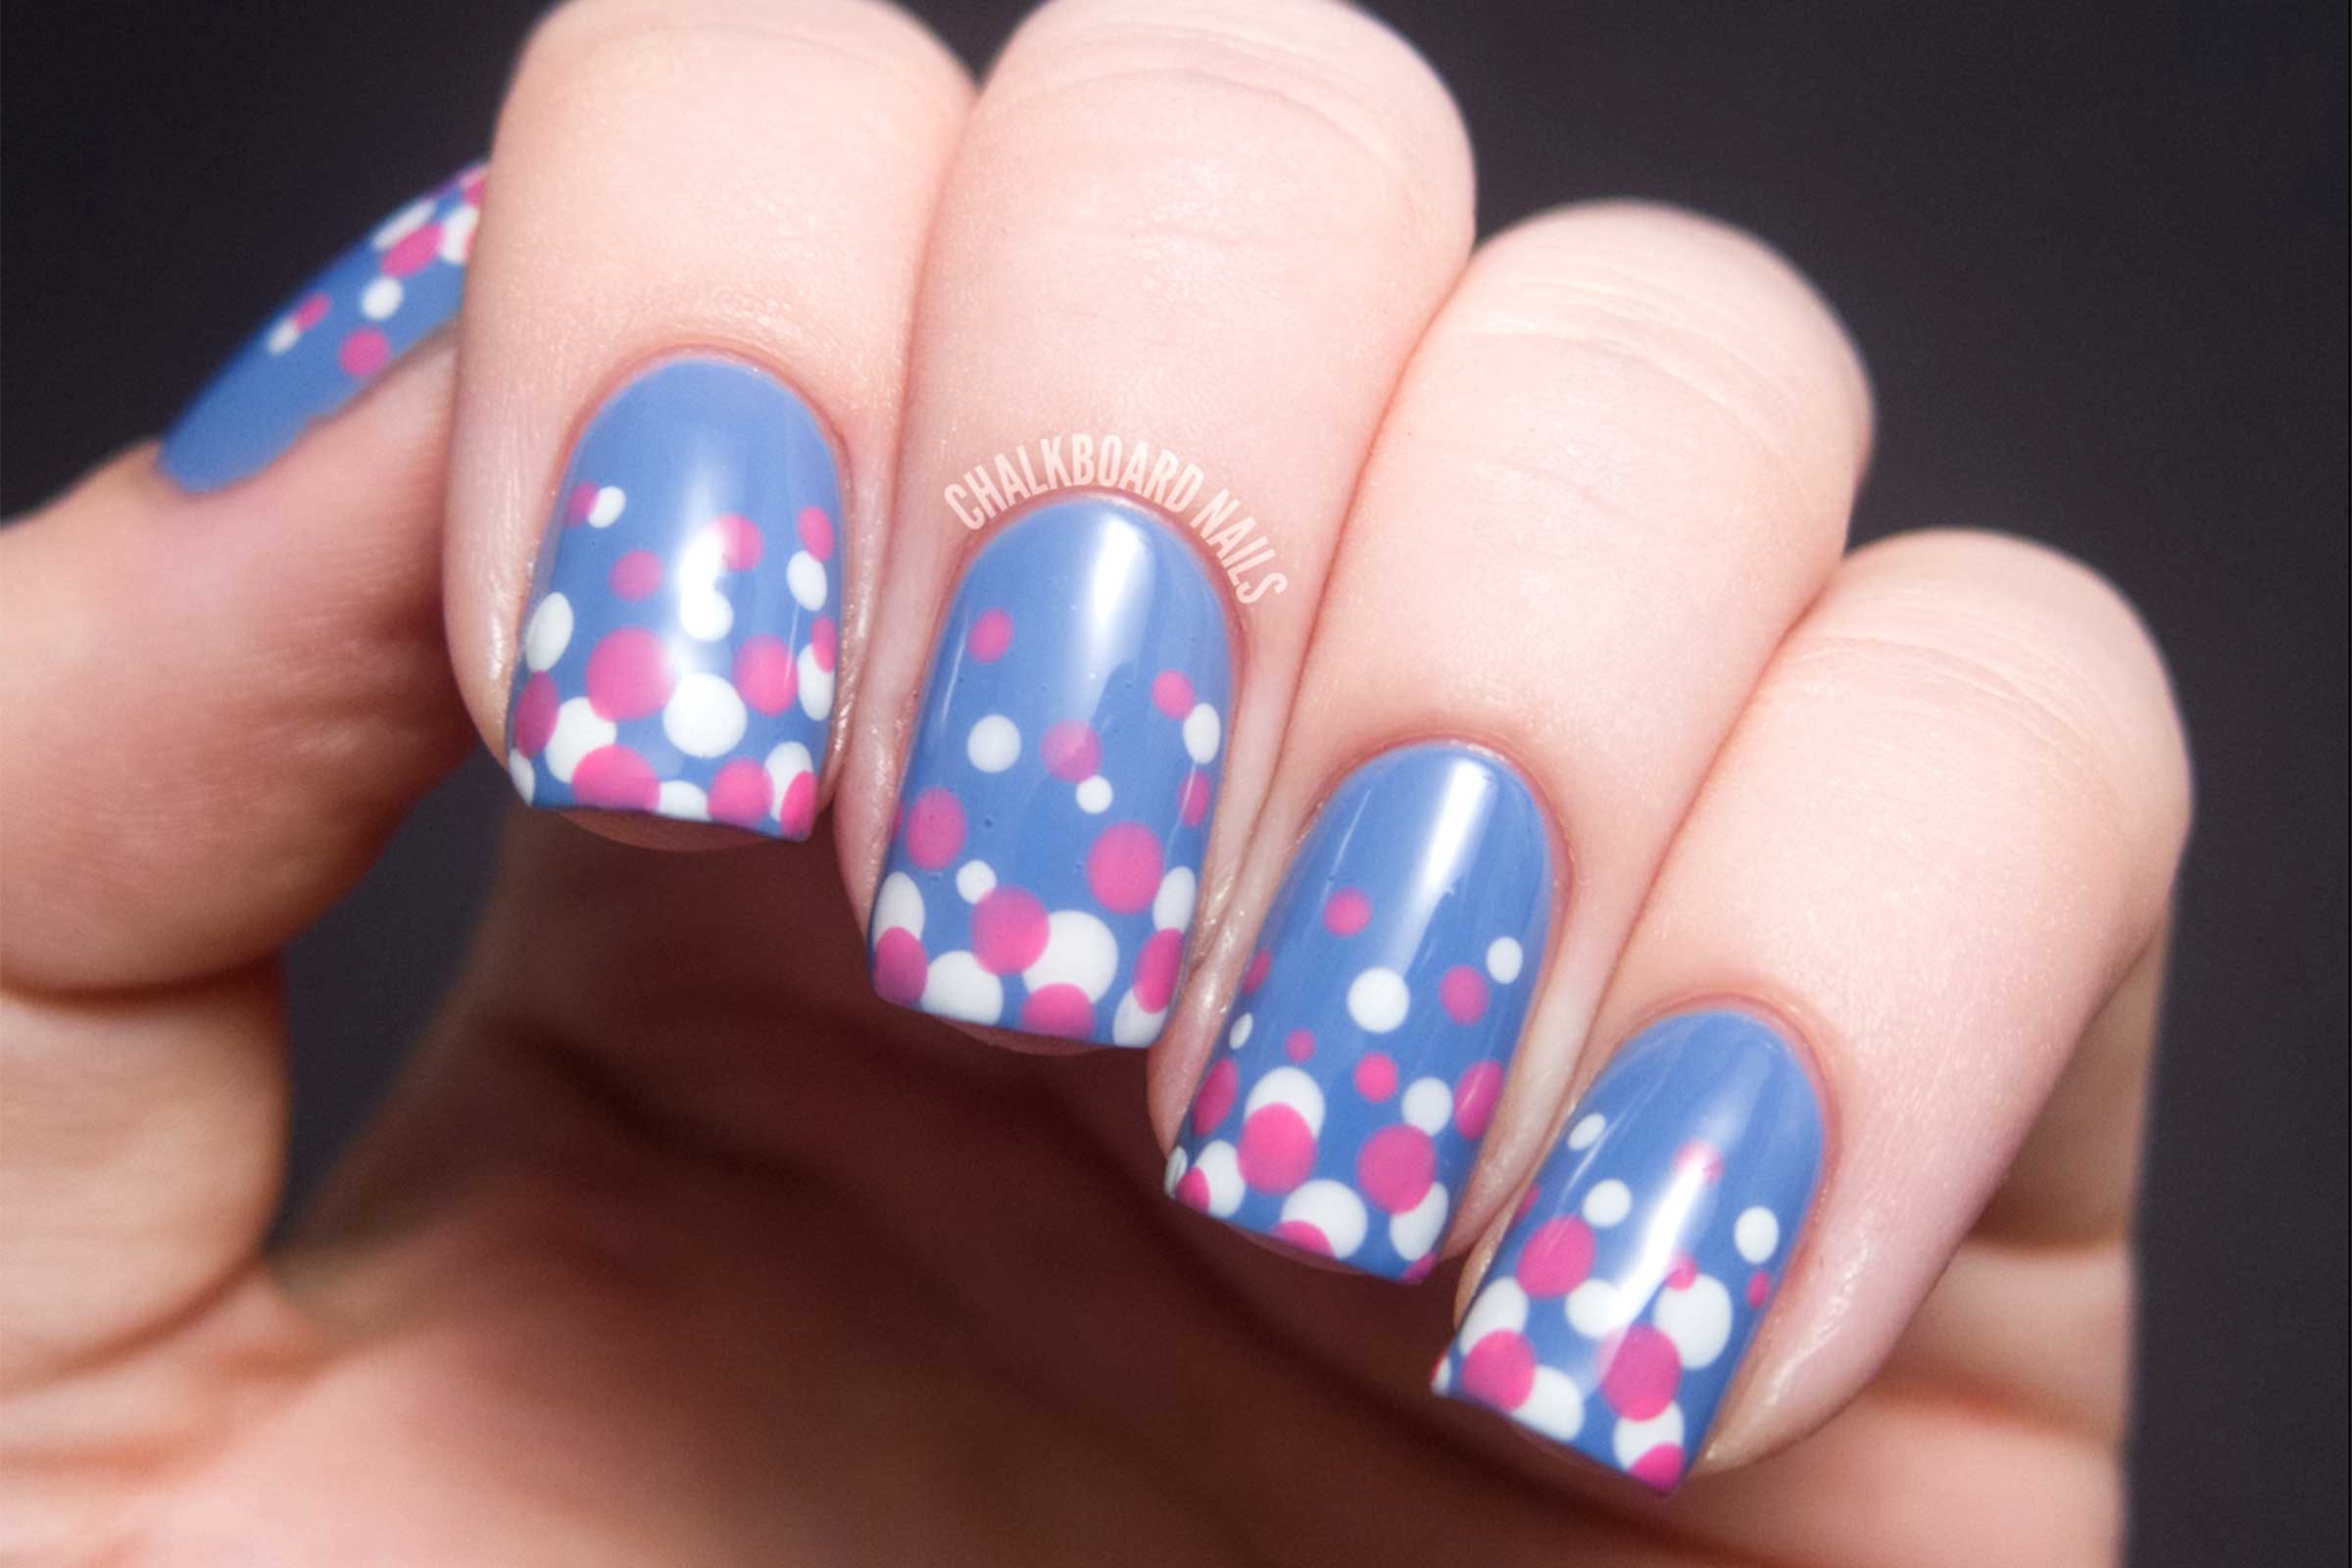 10. Vibrant and Eye-Catching Nail Art Designs - wide 7